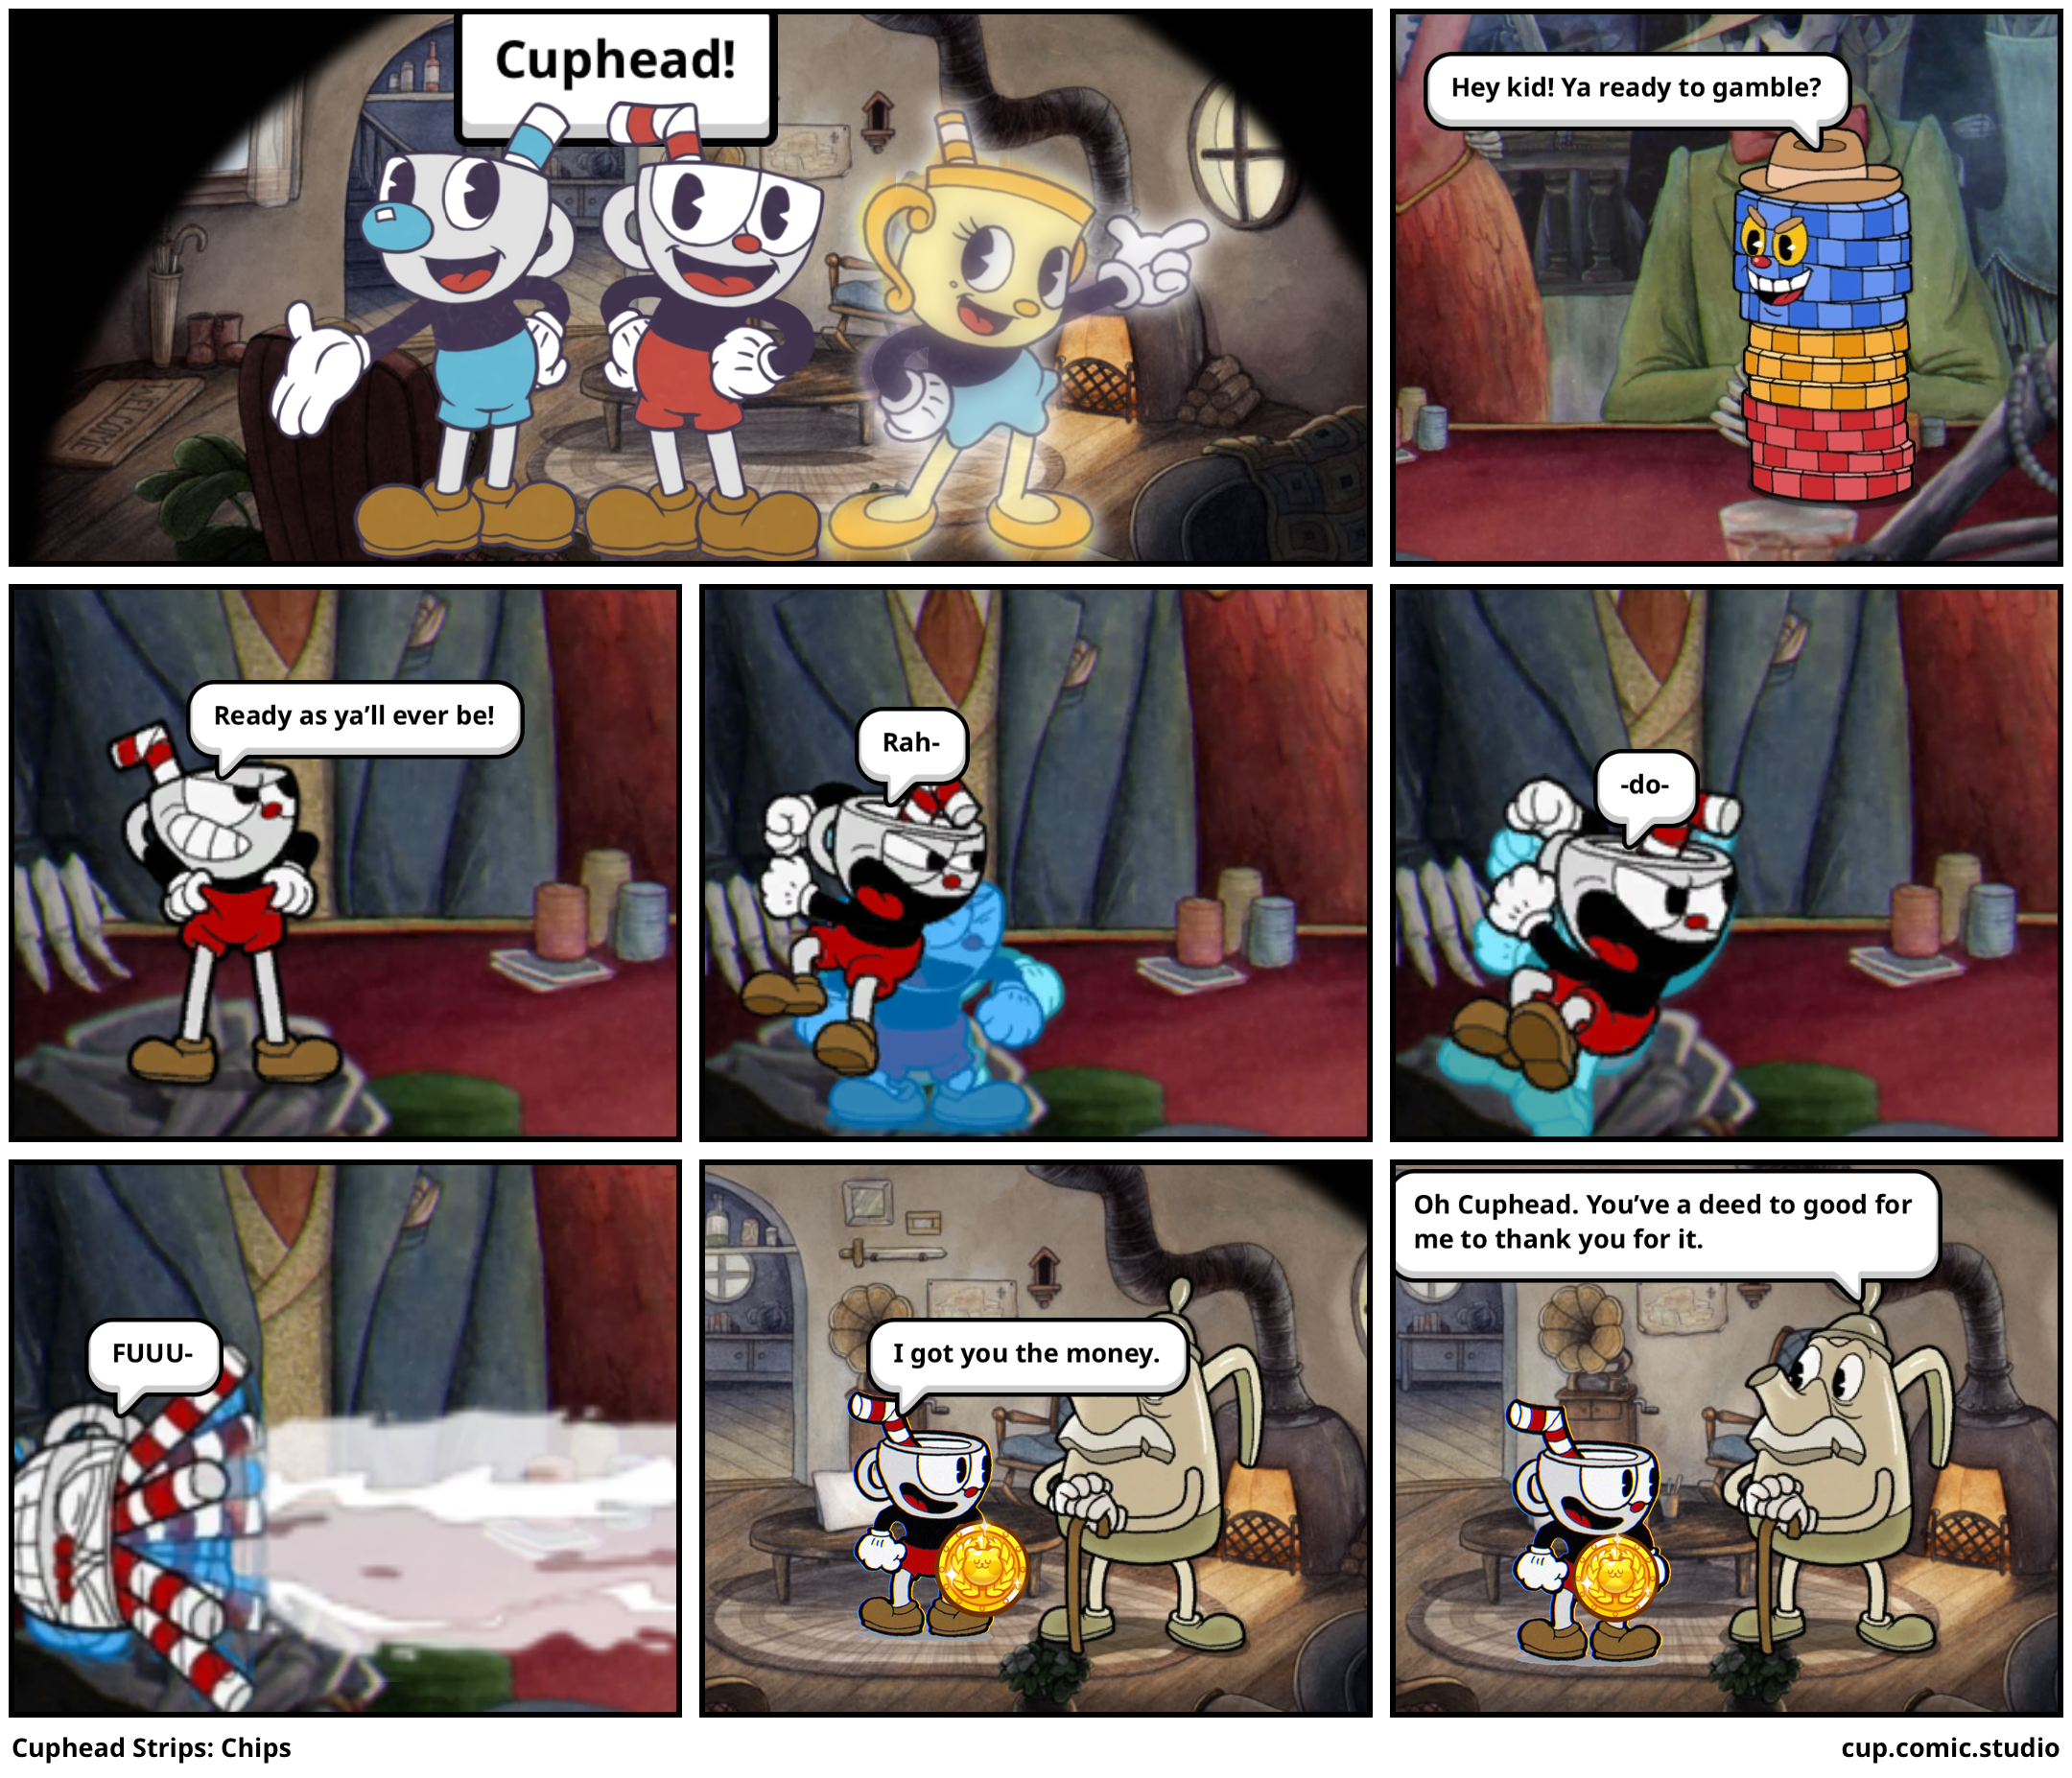 Cuphead Strips: Chips